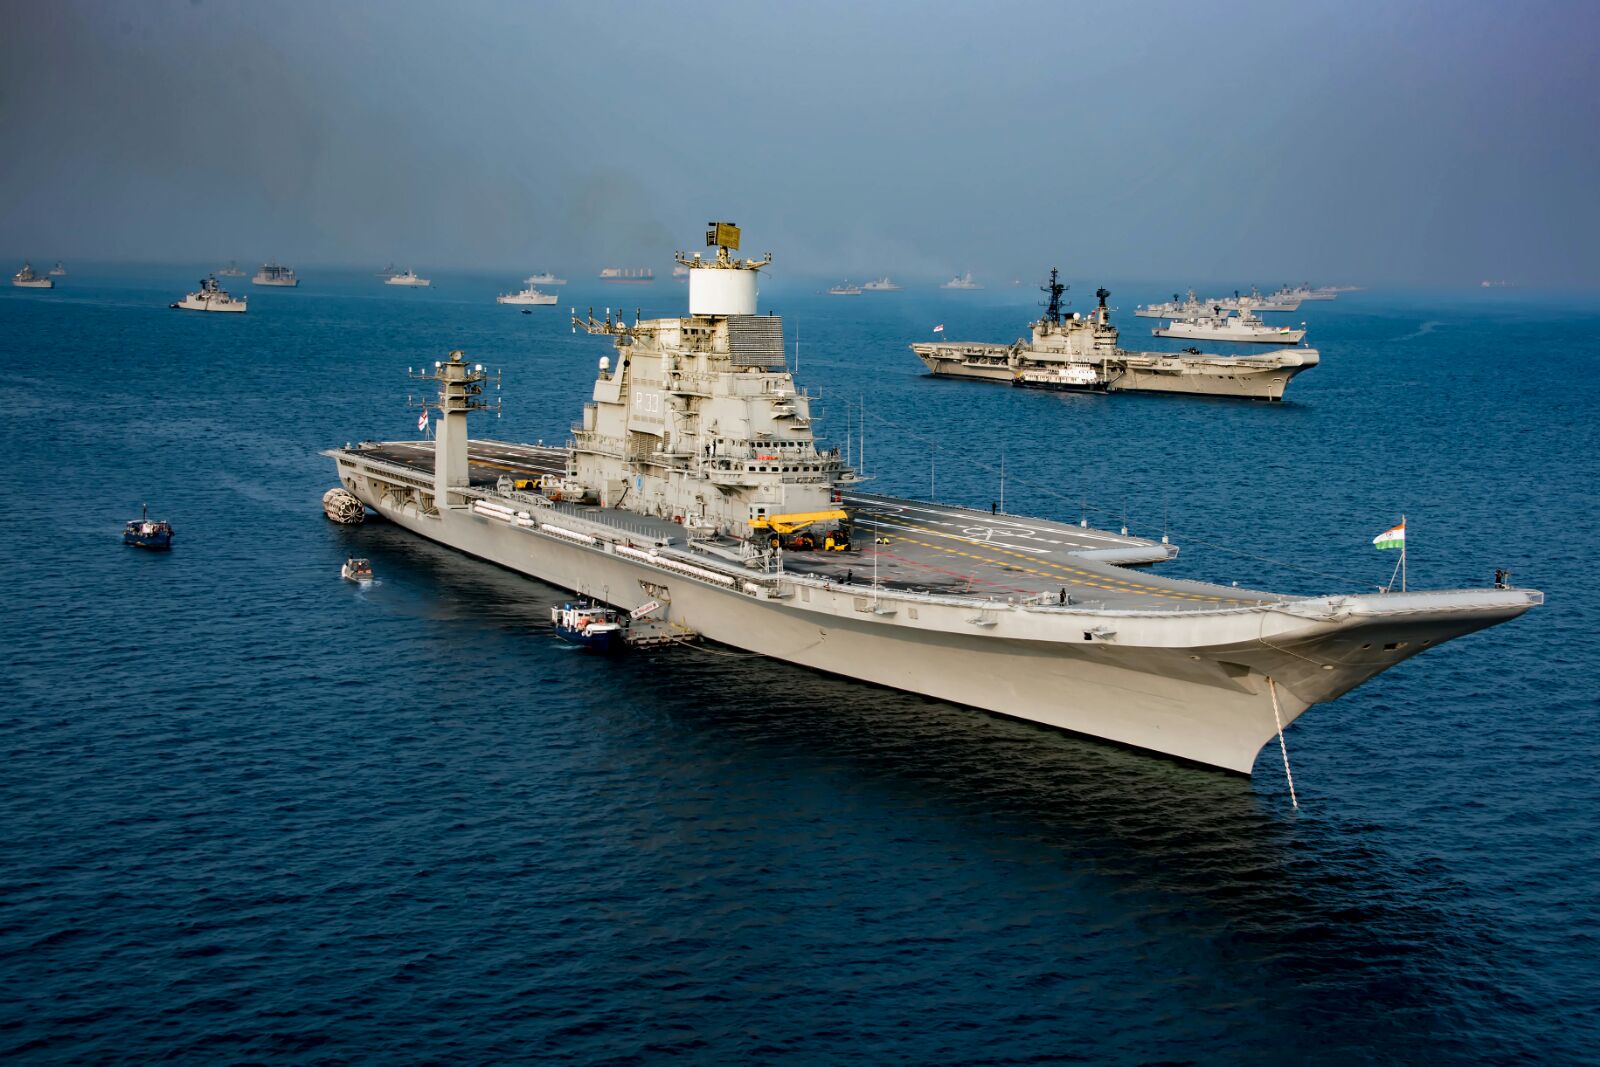 GRSE Shipyard, Goa Shipyard, and Hindustan Shipyard held talks with Russia's Morinformsystem-Agat on new joint projects for the Indian Navy.